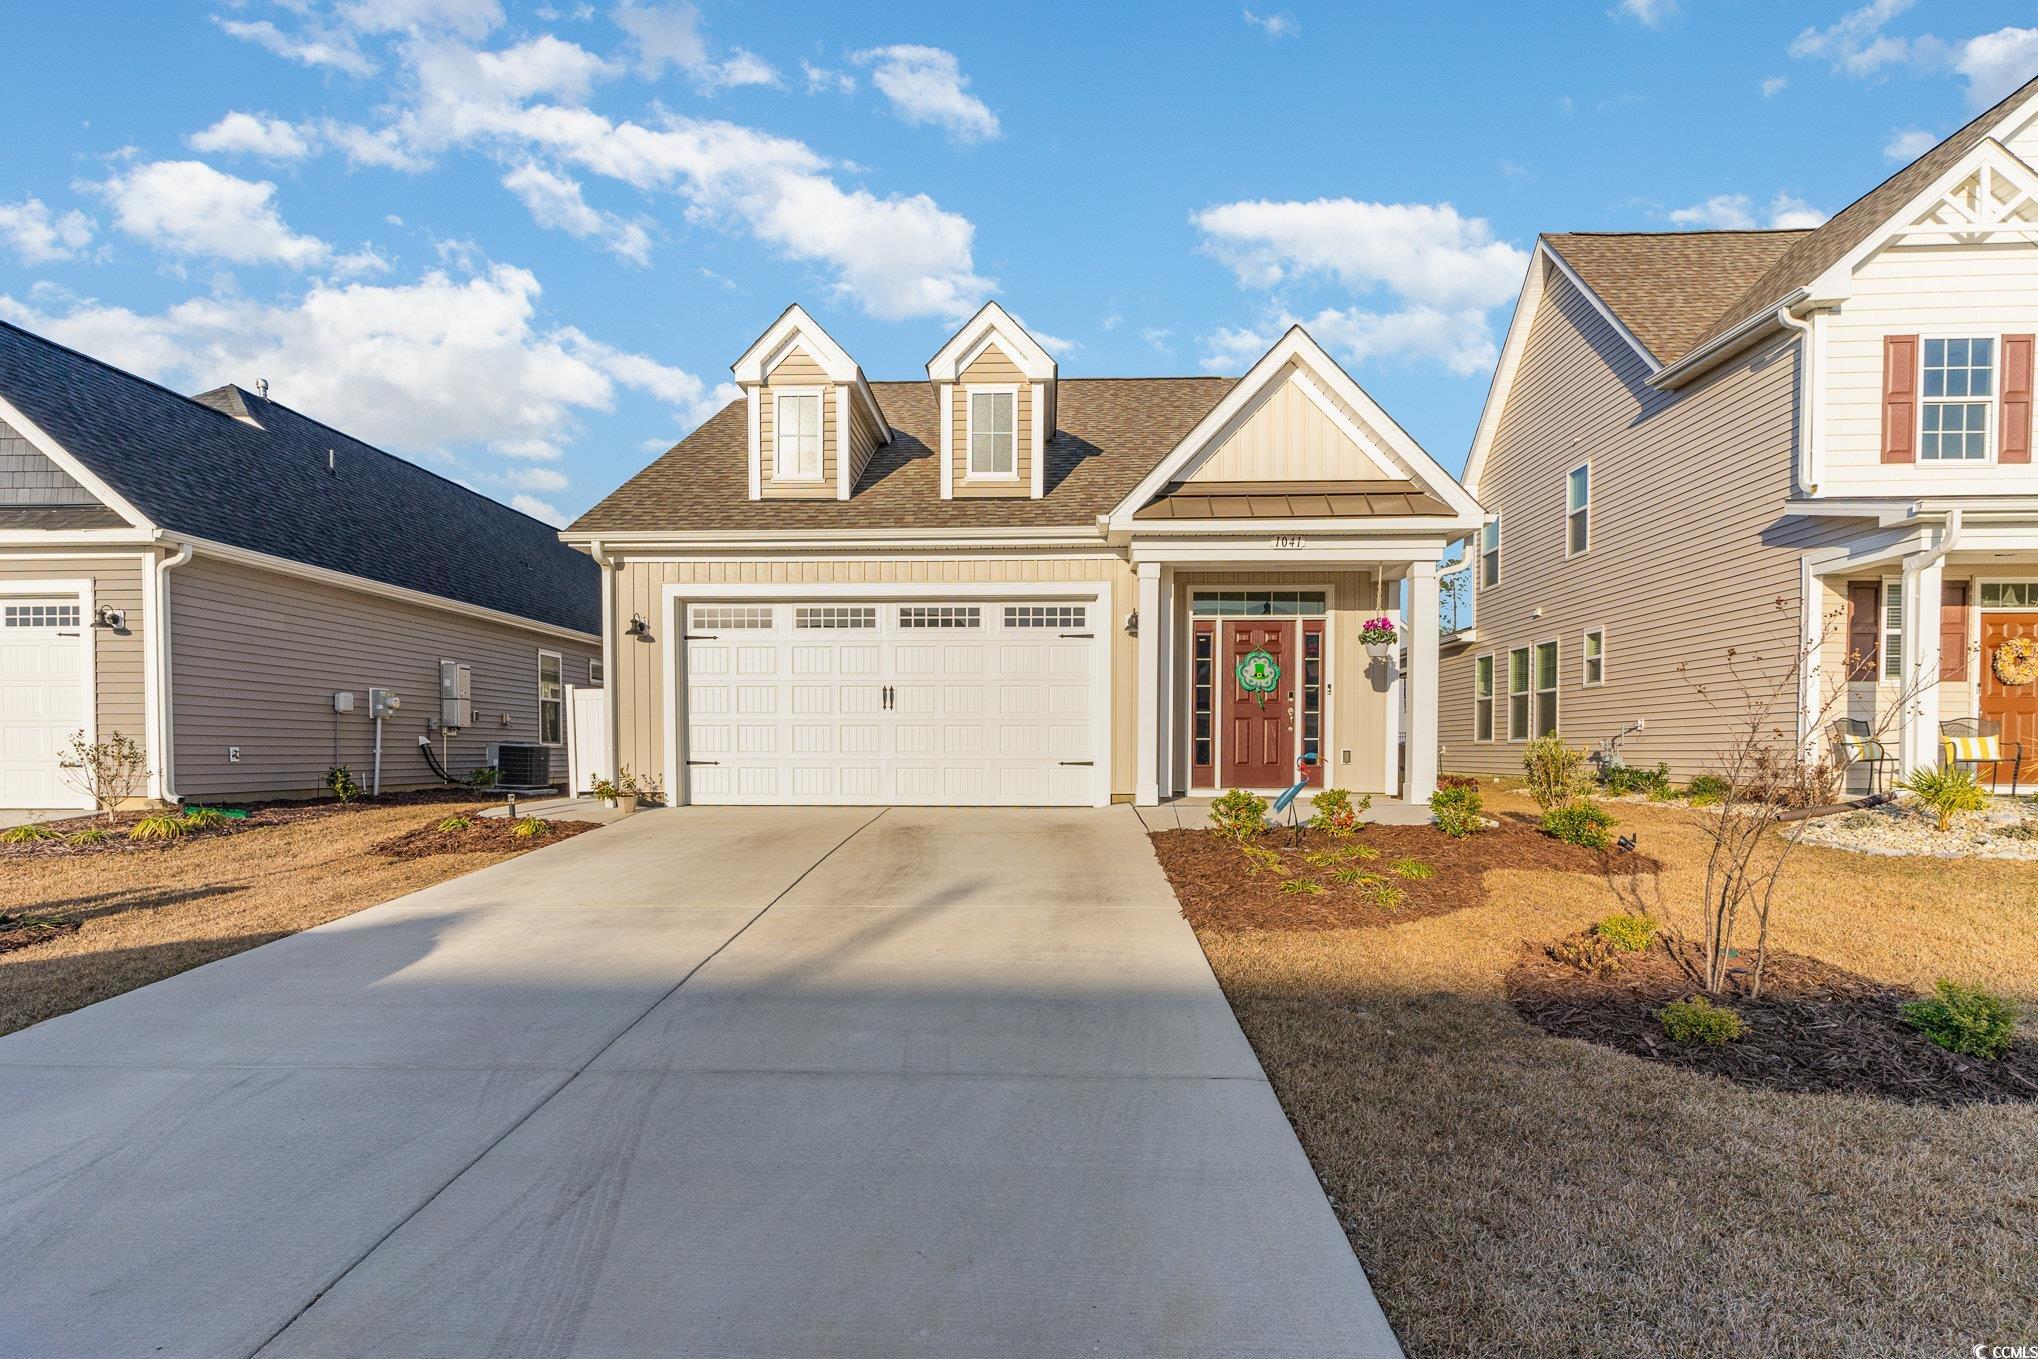 ***open house this sunday, 3/24/24 from 1:00 to 3:00***  located in the highly desirable bridgewater community, 1041 cascade loop in little river, sc, offers an exceptional opportunity to own a 2-year-old home without the wait of new construction. this beautifully maintained 3-bedroom, 3-bathroom home spans just over 2000 square feet, providing ample space and comfort. the primary bedroom boasts an attached bathroom and walk-in closet, while an additional bedroom and bathroom are conveniently located on the first floor. upstairs, a loft space, third bedroom, and third full bathroom offer flexibility and privacy. the seller has thoughtfully added ceiling fans, an extended rear patio, trash stash, blinds, and a screened-in porch to enhance your living experience.  the bridgewater community features an array of fantastic amenities, including a 5,000-square-foot clubhouse with a state-of-the-art fitness center offering virtual fitness classes through the wellbeats™ system. enjoy the resort-style pool with lap lanes, surrounded by lounge spaces and private cabanas, a pickleball court, fire pit, kayak launch, and an enormous outdoor cookout area at the covered pavilion featuring grills and televisions. additionally, residents can take advantage of a community garden, dog park, and walking trails.  conveniently located just across highway 9 from mcleod seacoast hospital, and a short 5-minute drive to cherry grove beach, this home offers both comfort and convenience. don't miss out on this opportunity to live in the sought-after bridgewater community without the stress of building new!